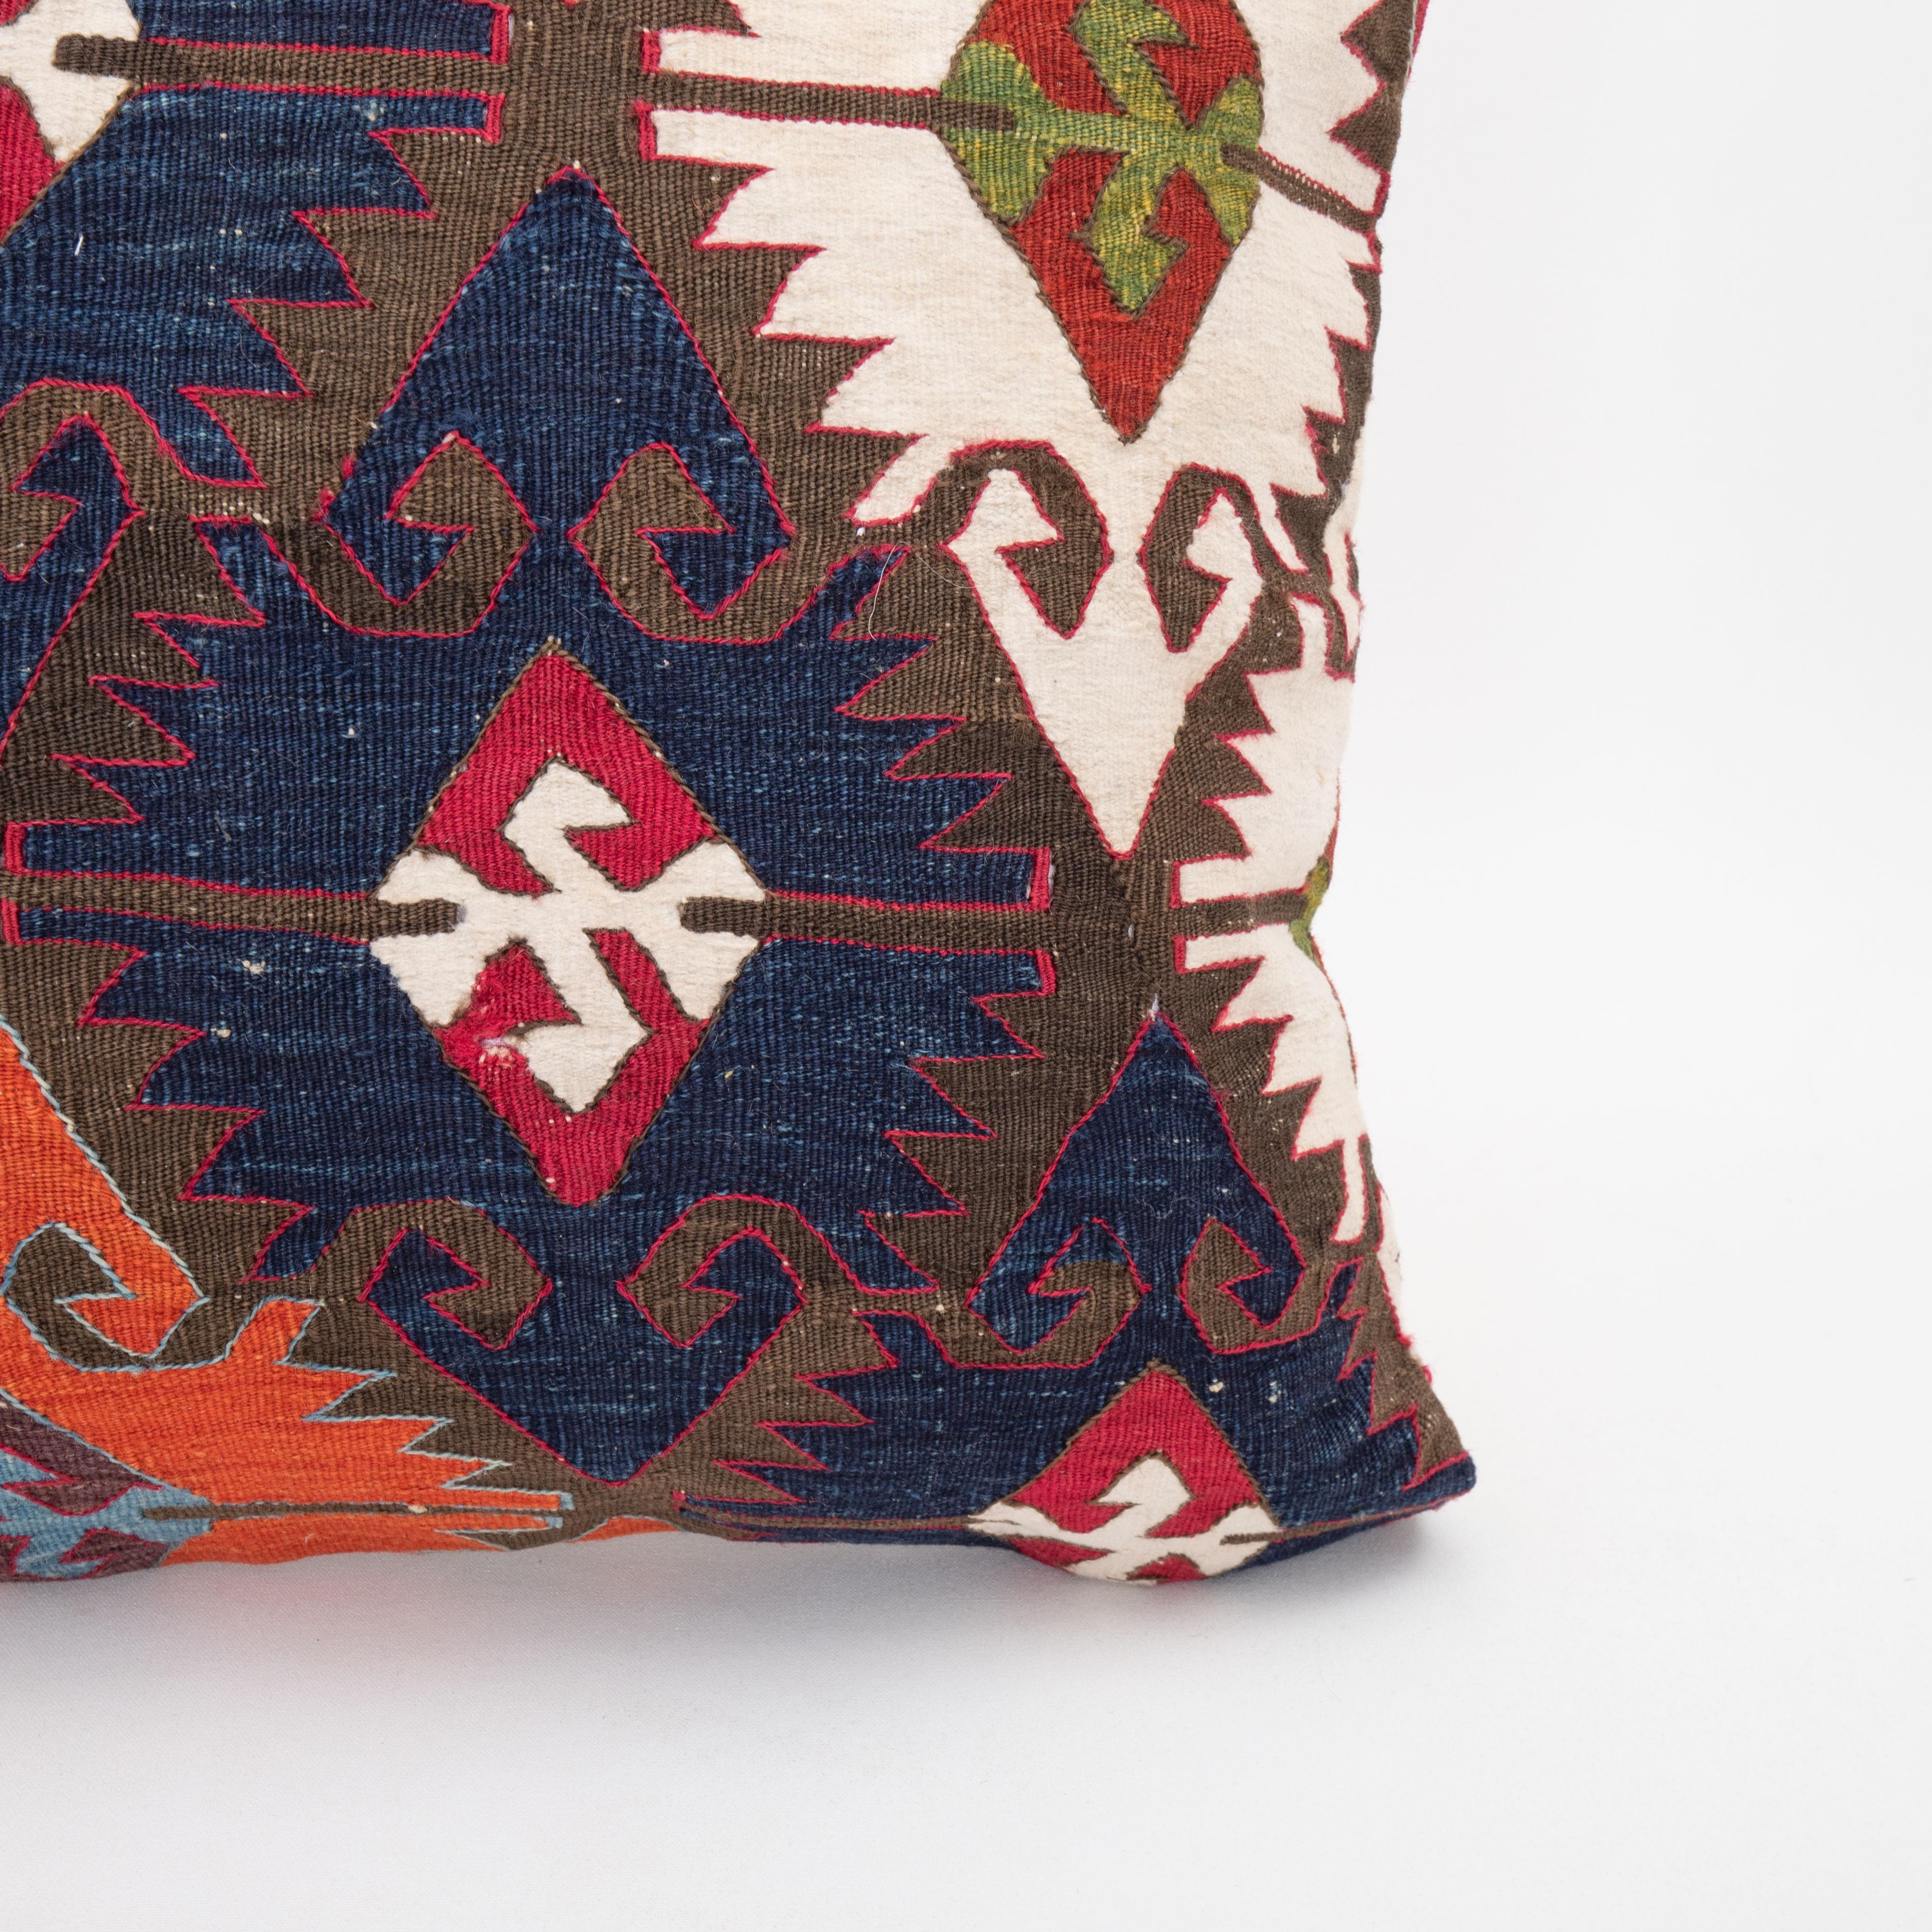 Hand-Woven Pillow Case Made from an Antique Anatolian Kilim For Sale